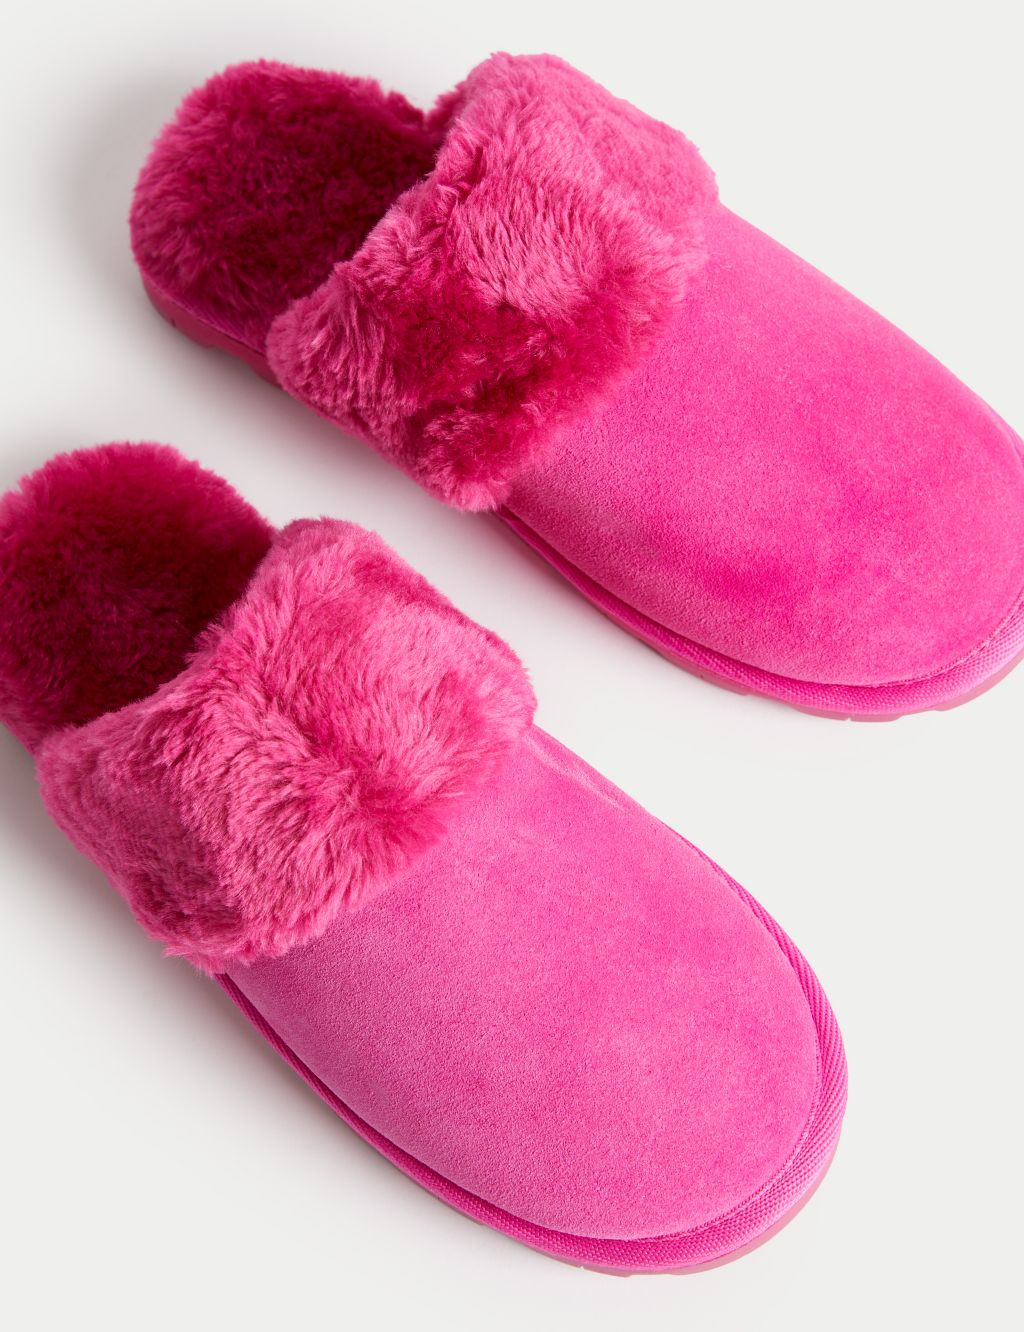 Kids' Suede Freshfeet™ Slippers (13 Small - 6 Large) image 3